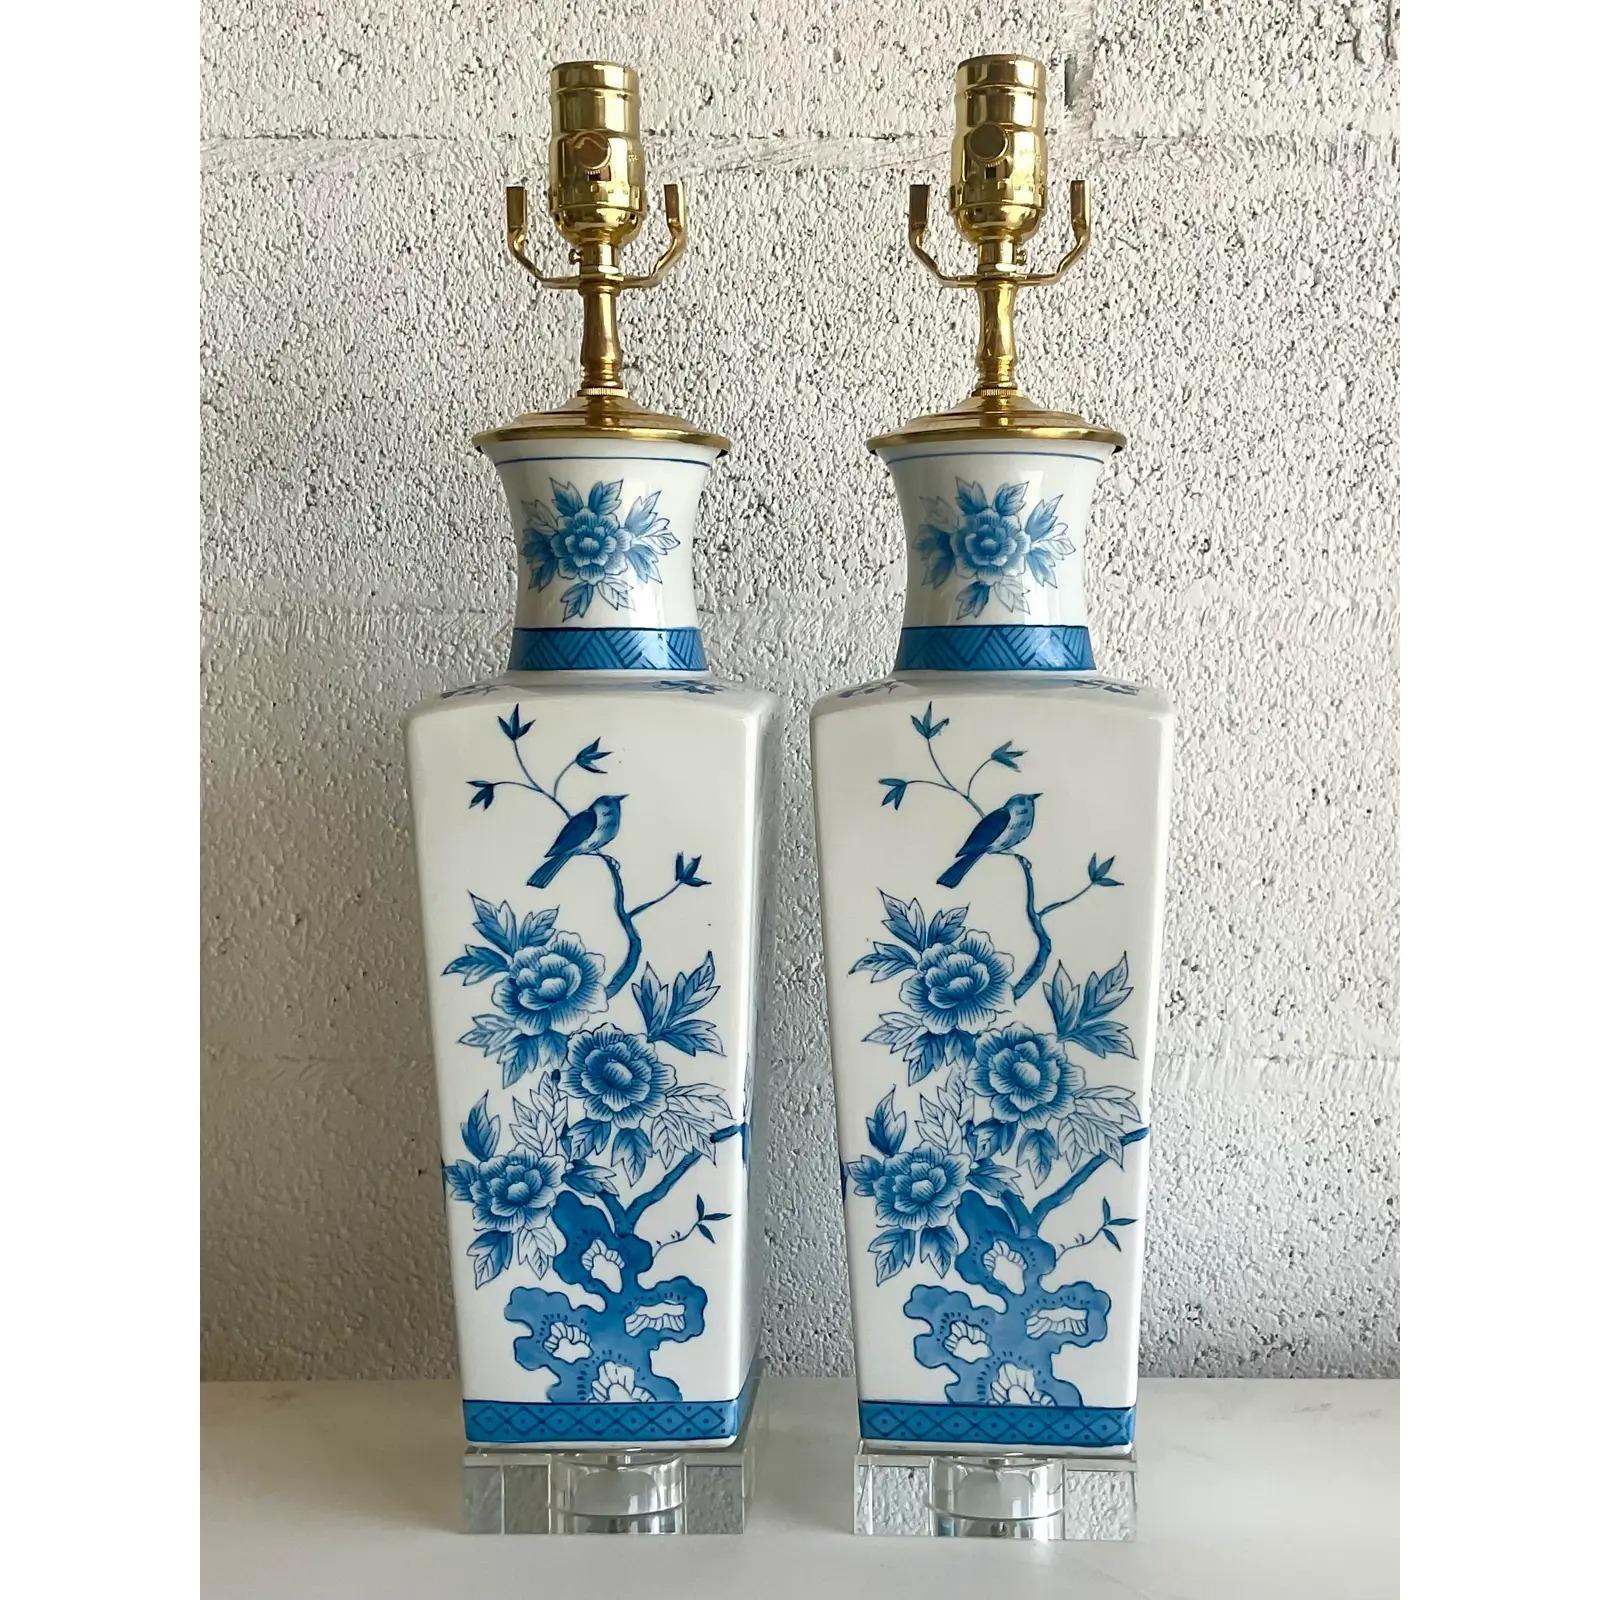 North American Vintage Regency Blue and White Chinoiserie Glazed Ceramic Lamps, a Pair